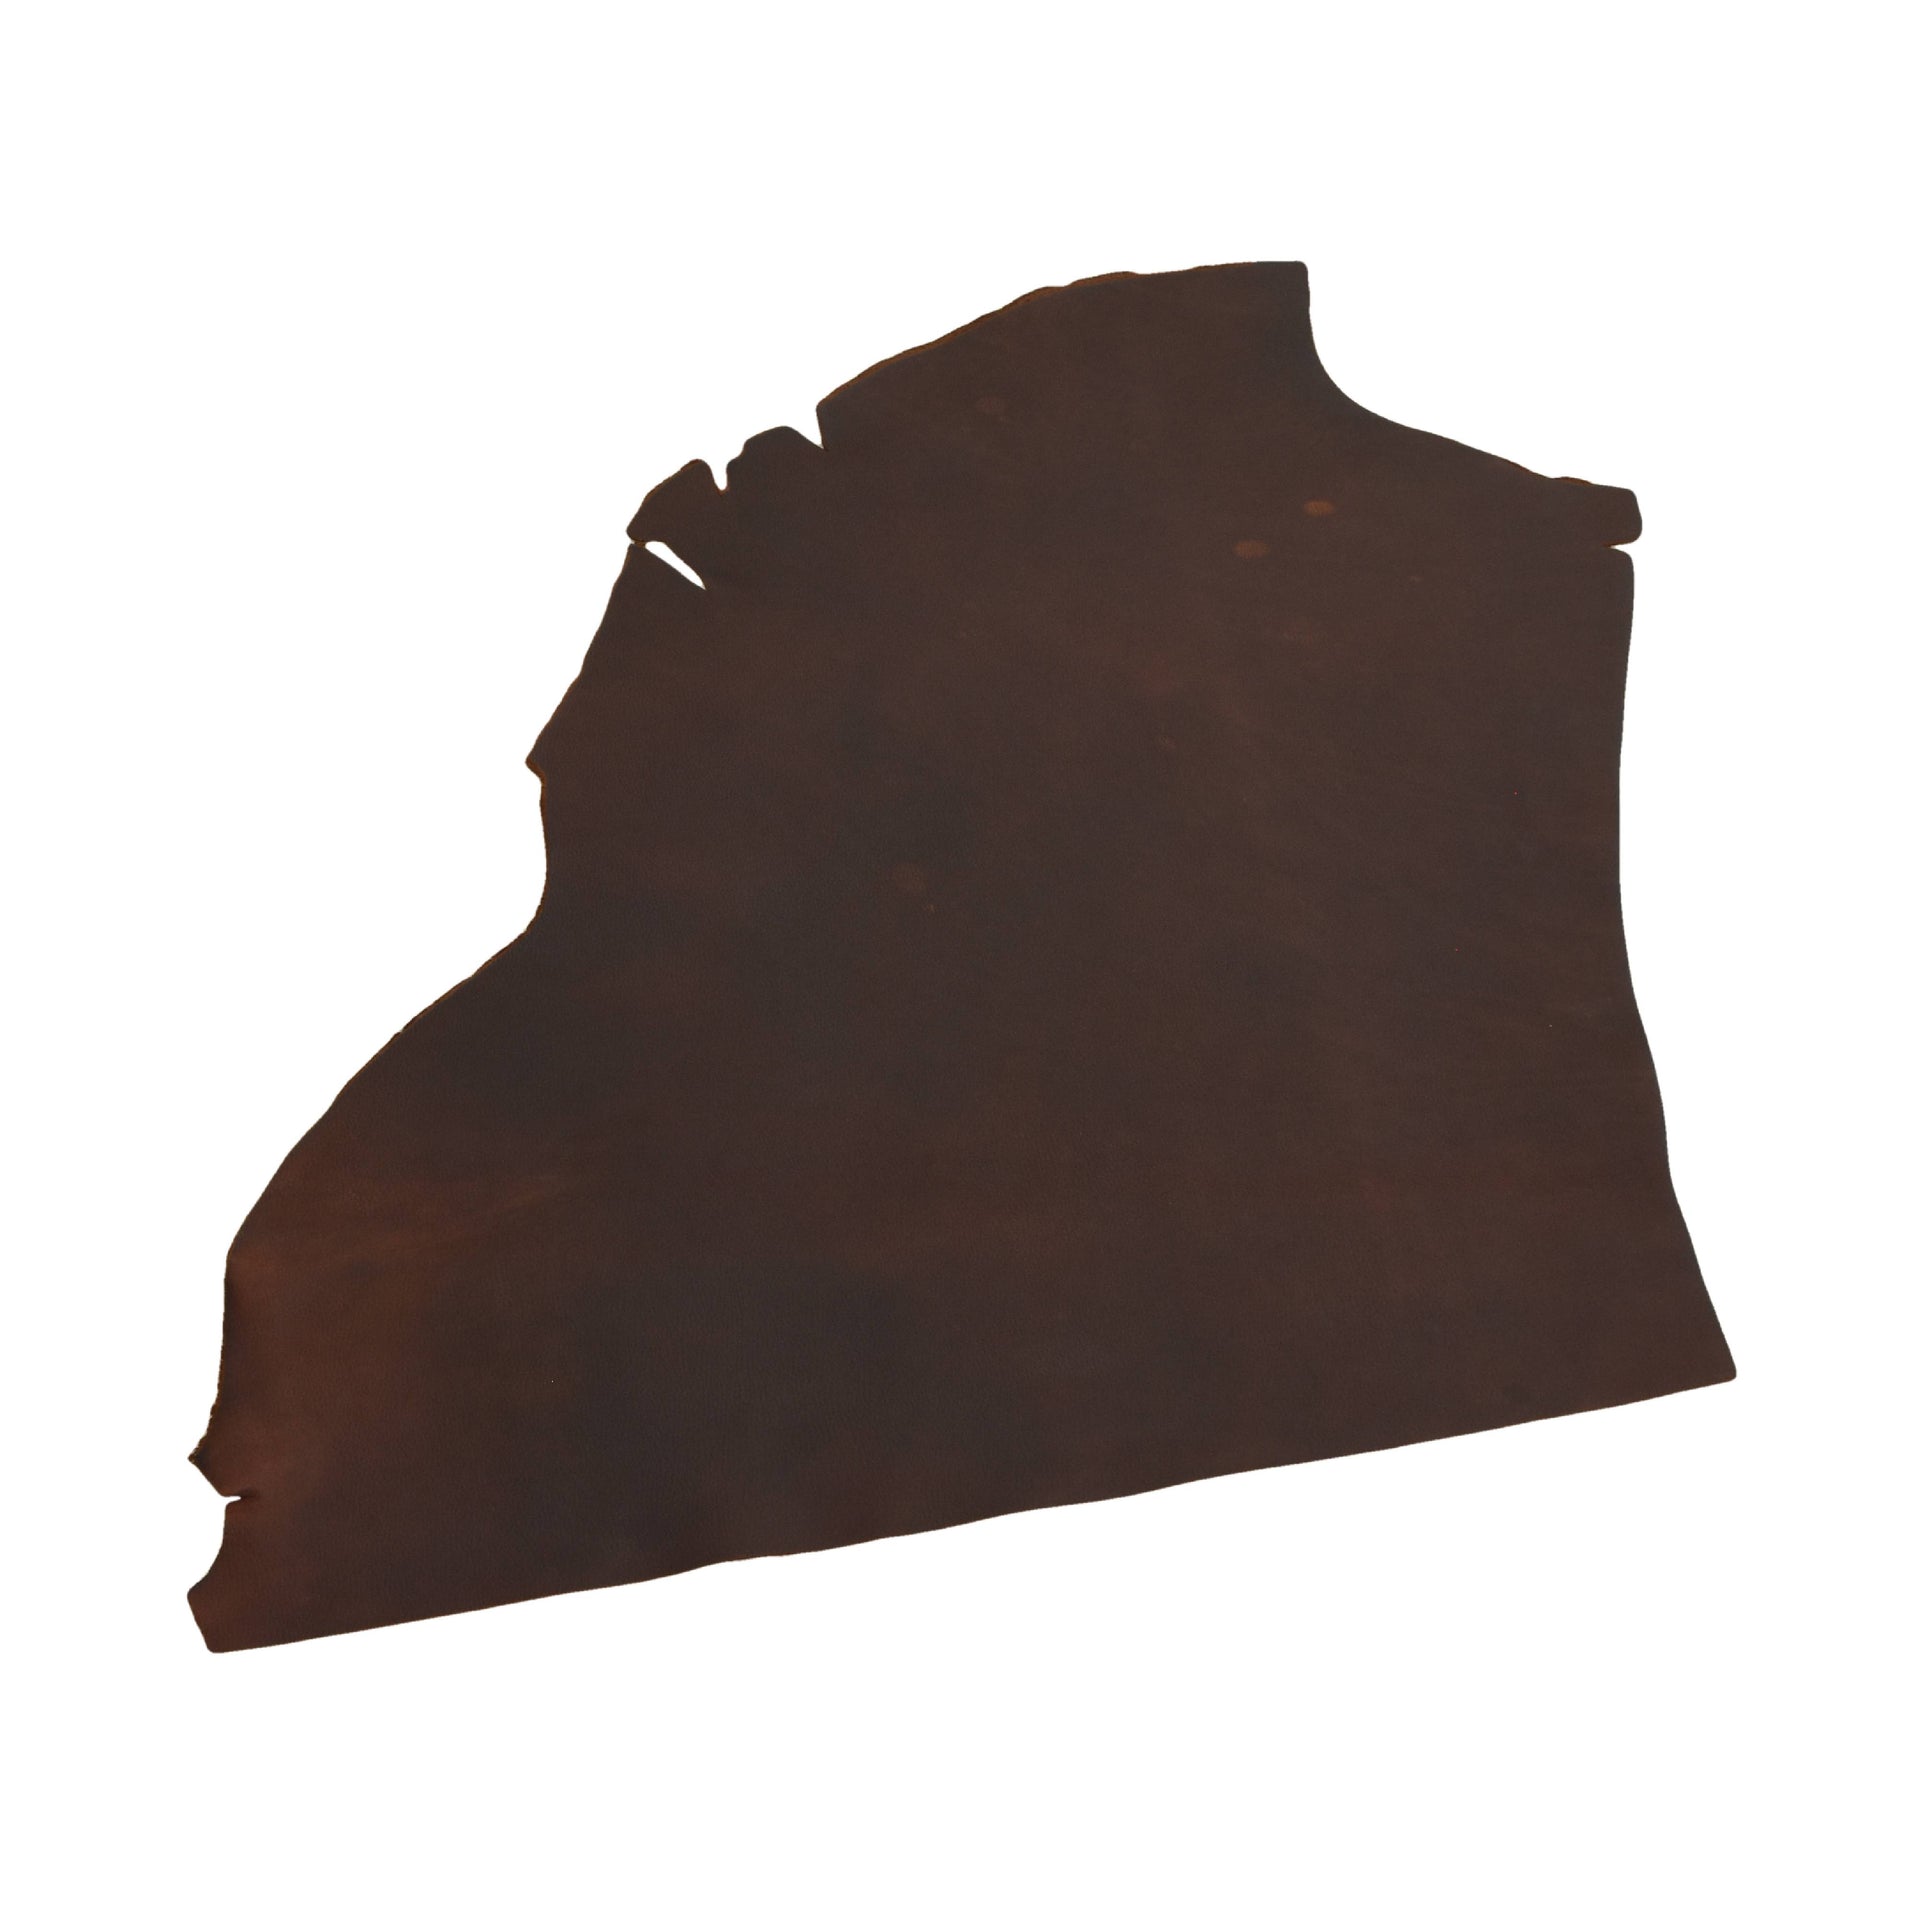 Denali Dark Mahogany, Oil Tanned Summits Edge Sides & Pieces, 6.5-7.5 Square Foot / Project Piece (Top) | The Leather Guy